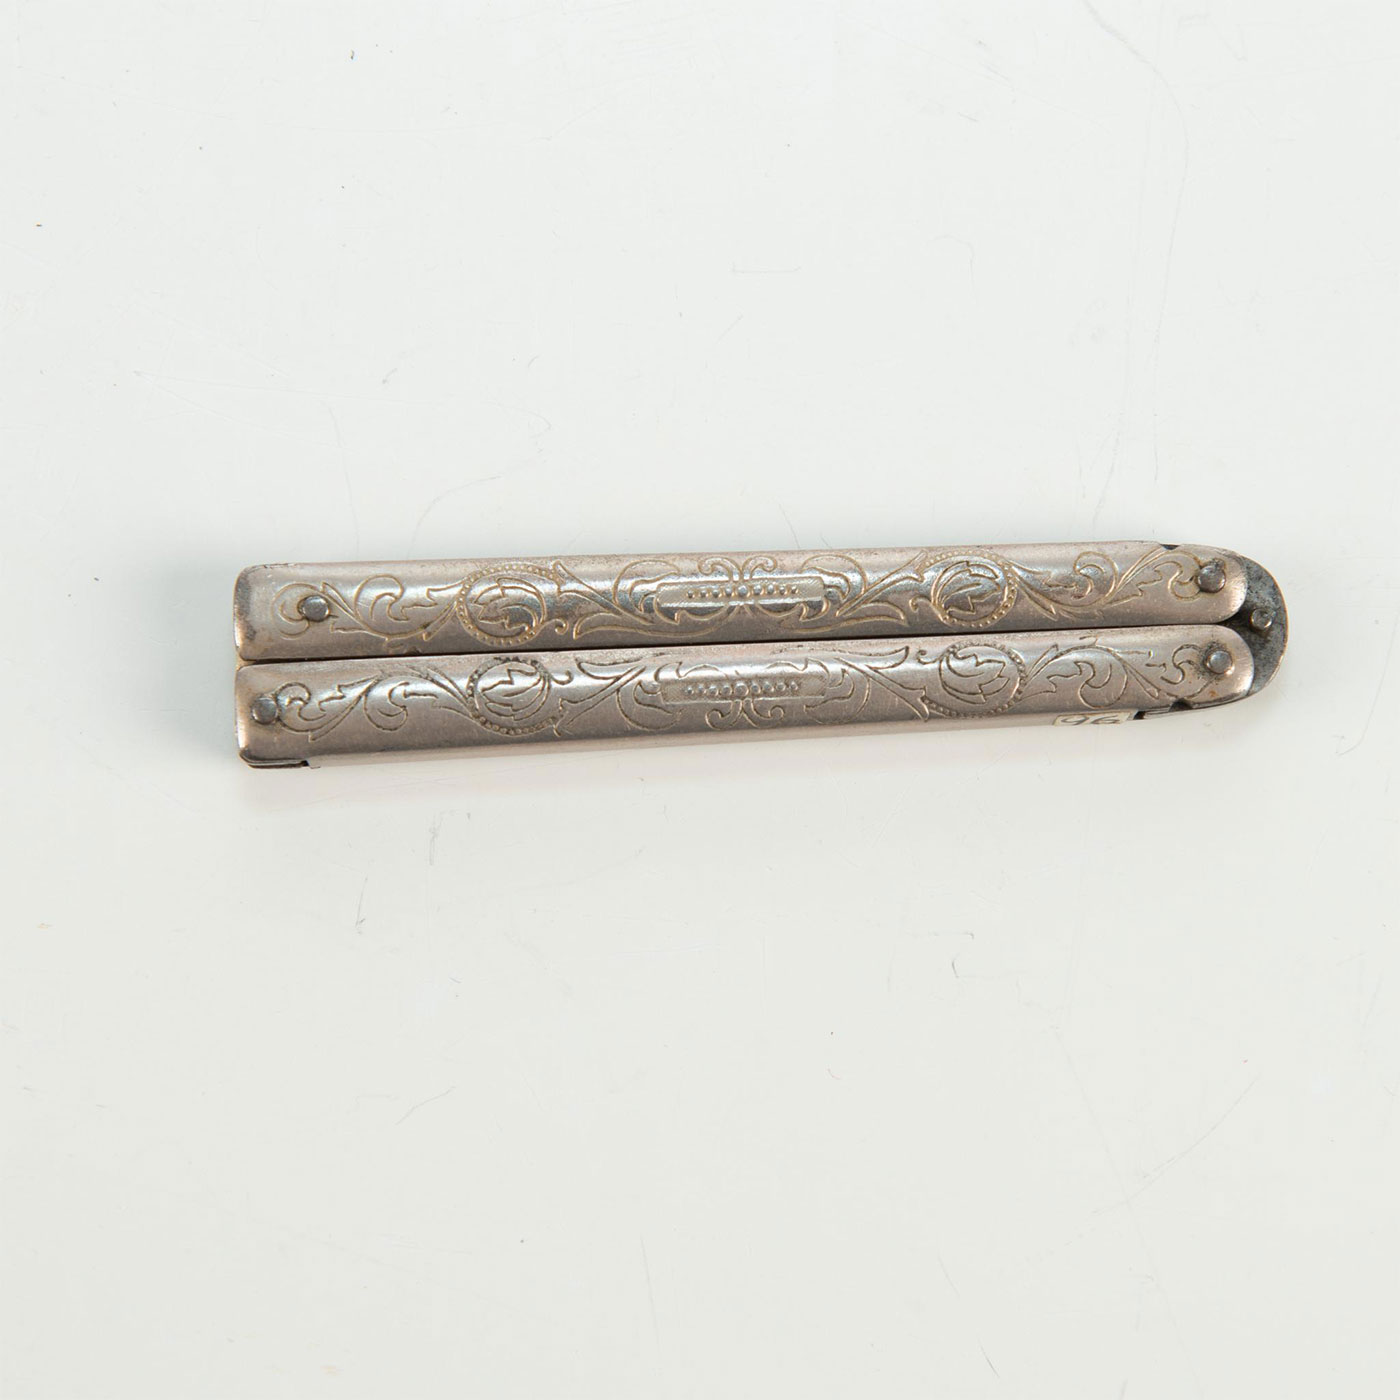 PETITE BUTTERFLY KNIFE - Image 8 of 8